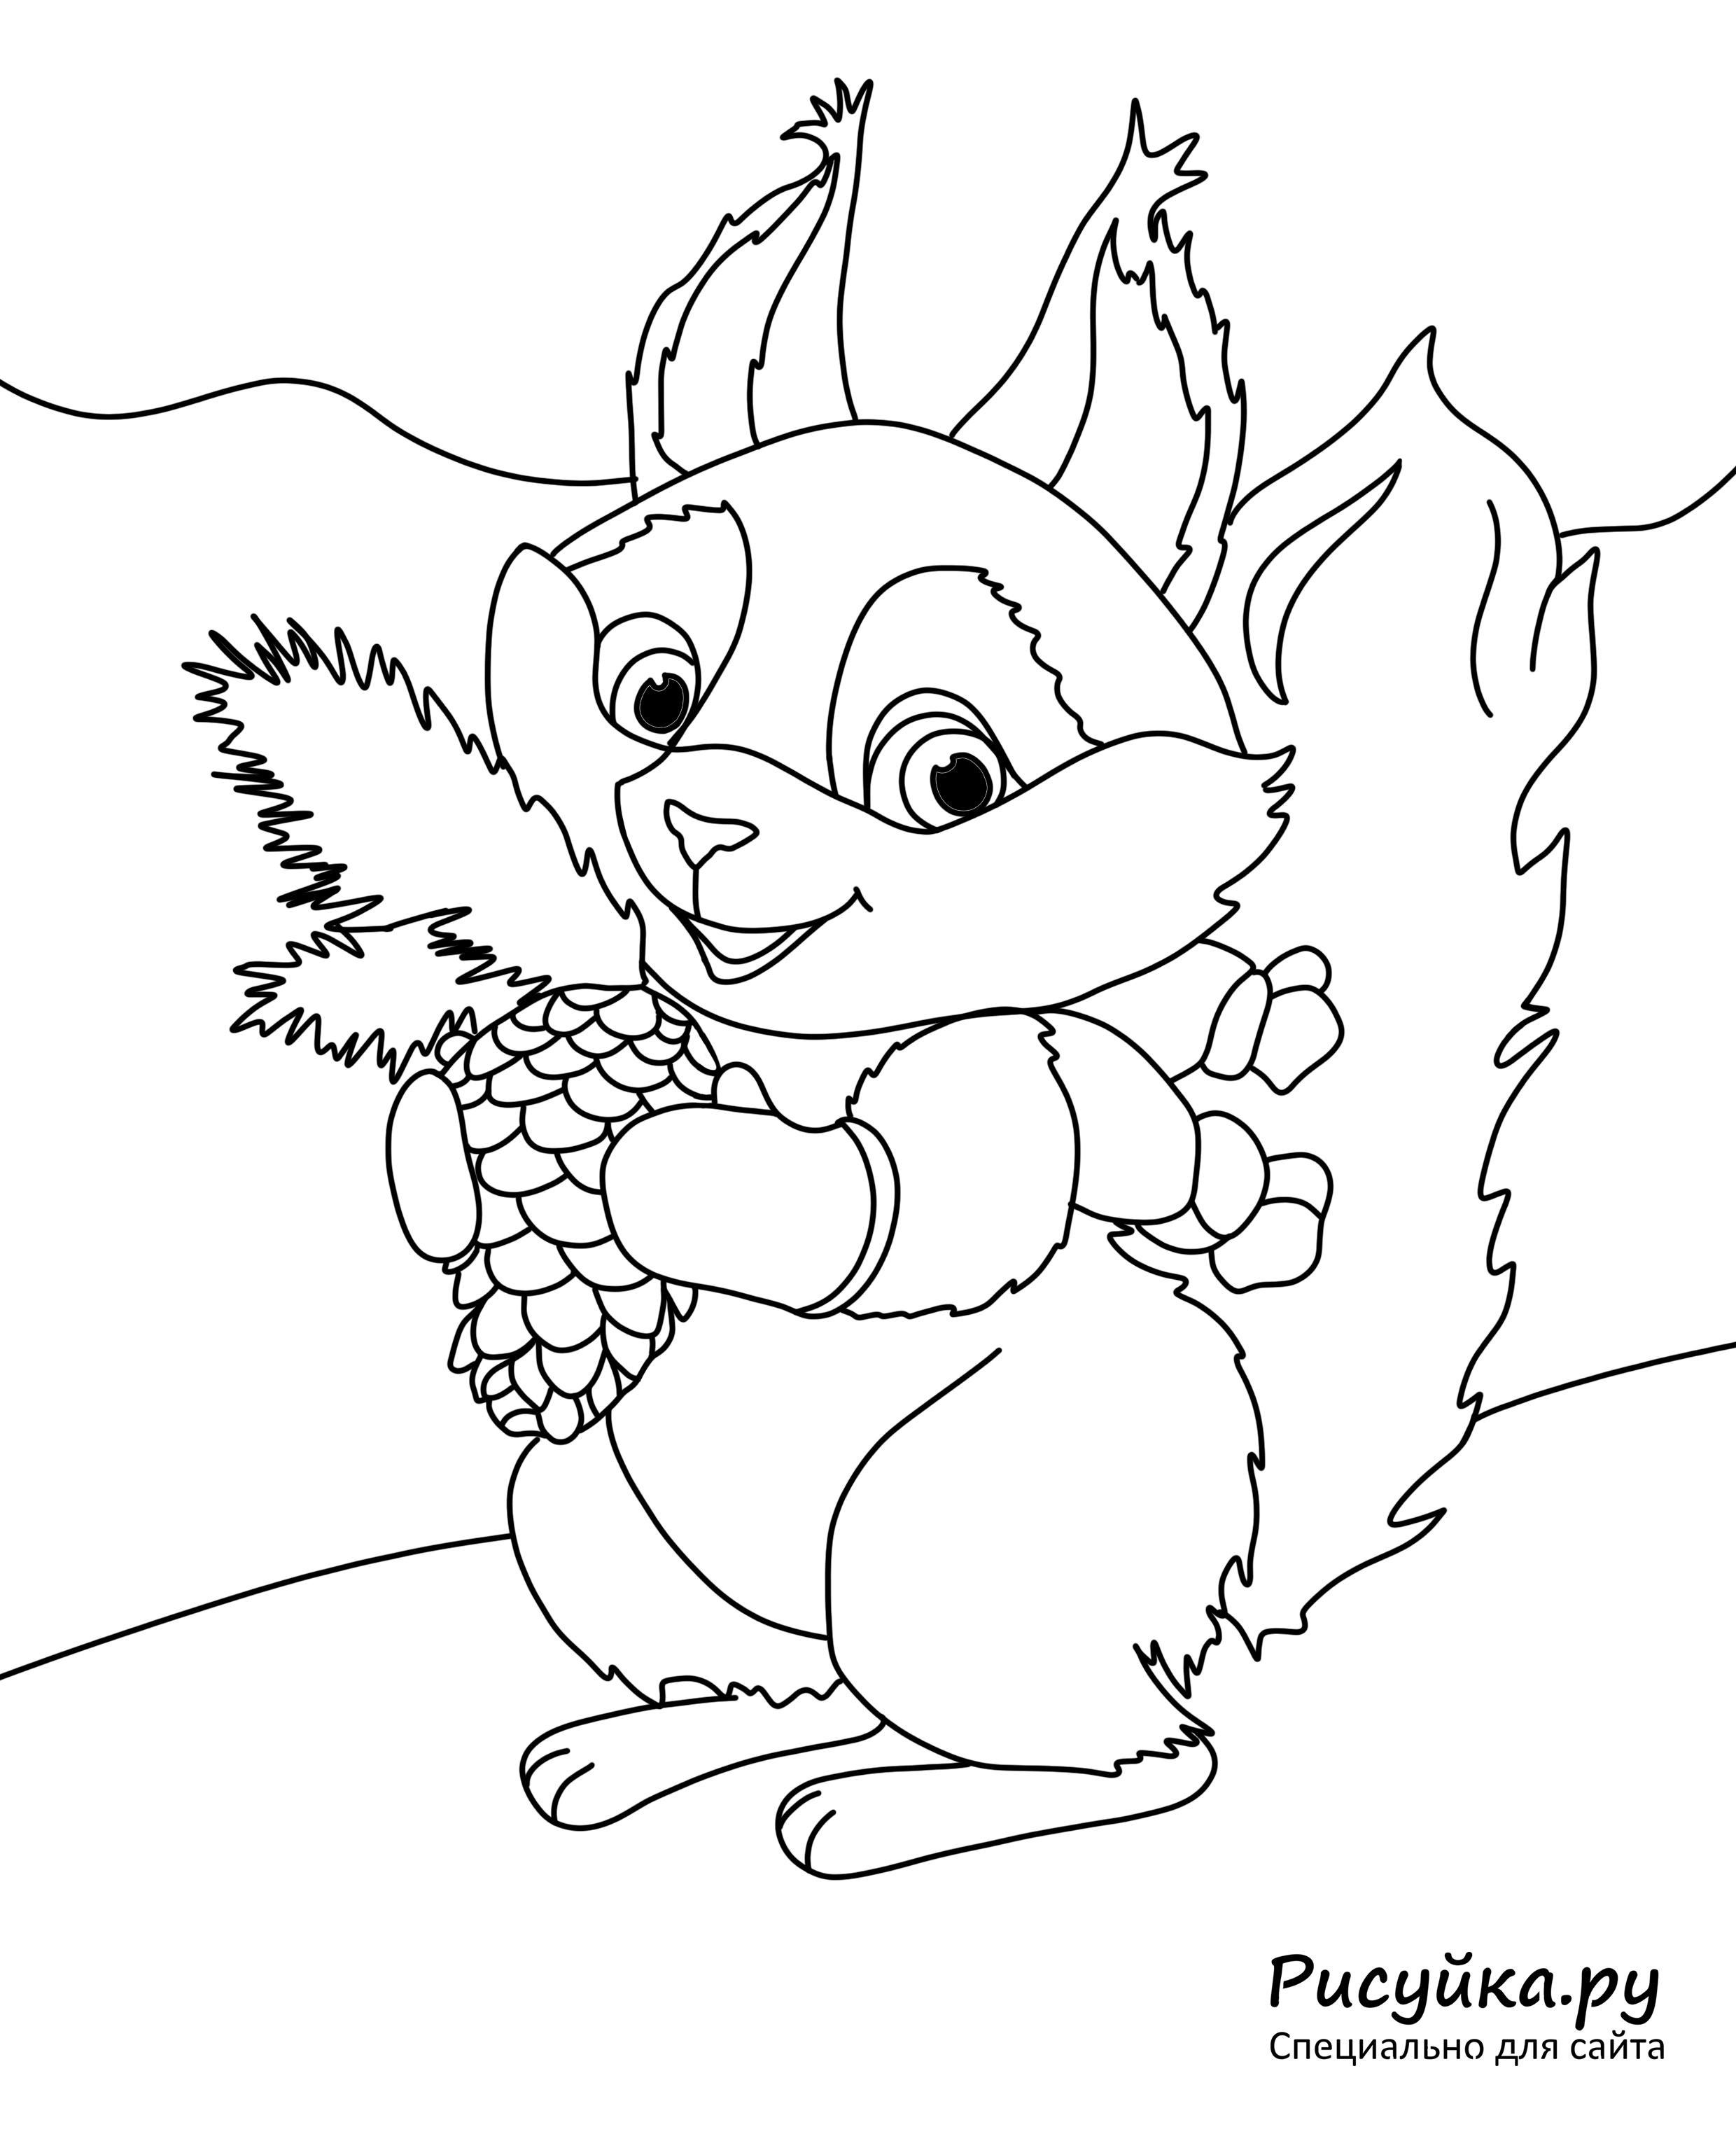 Amazing squirrel nuts coloring pages for kids